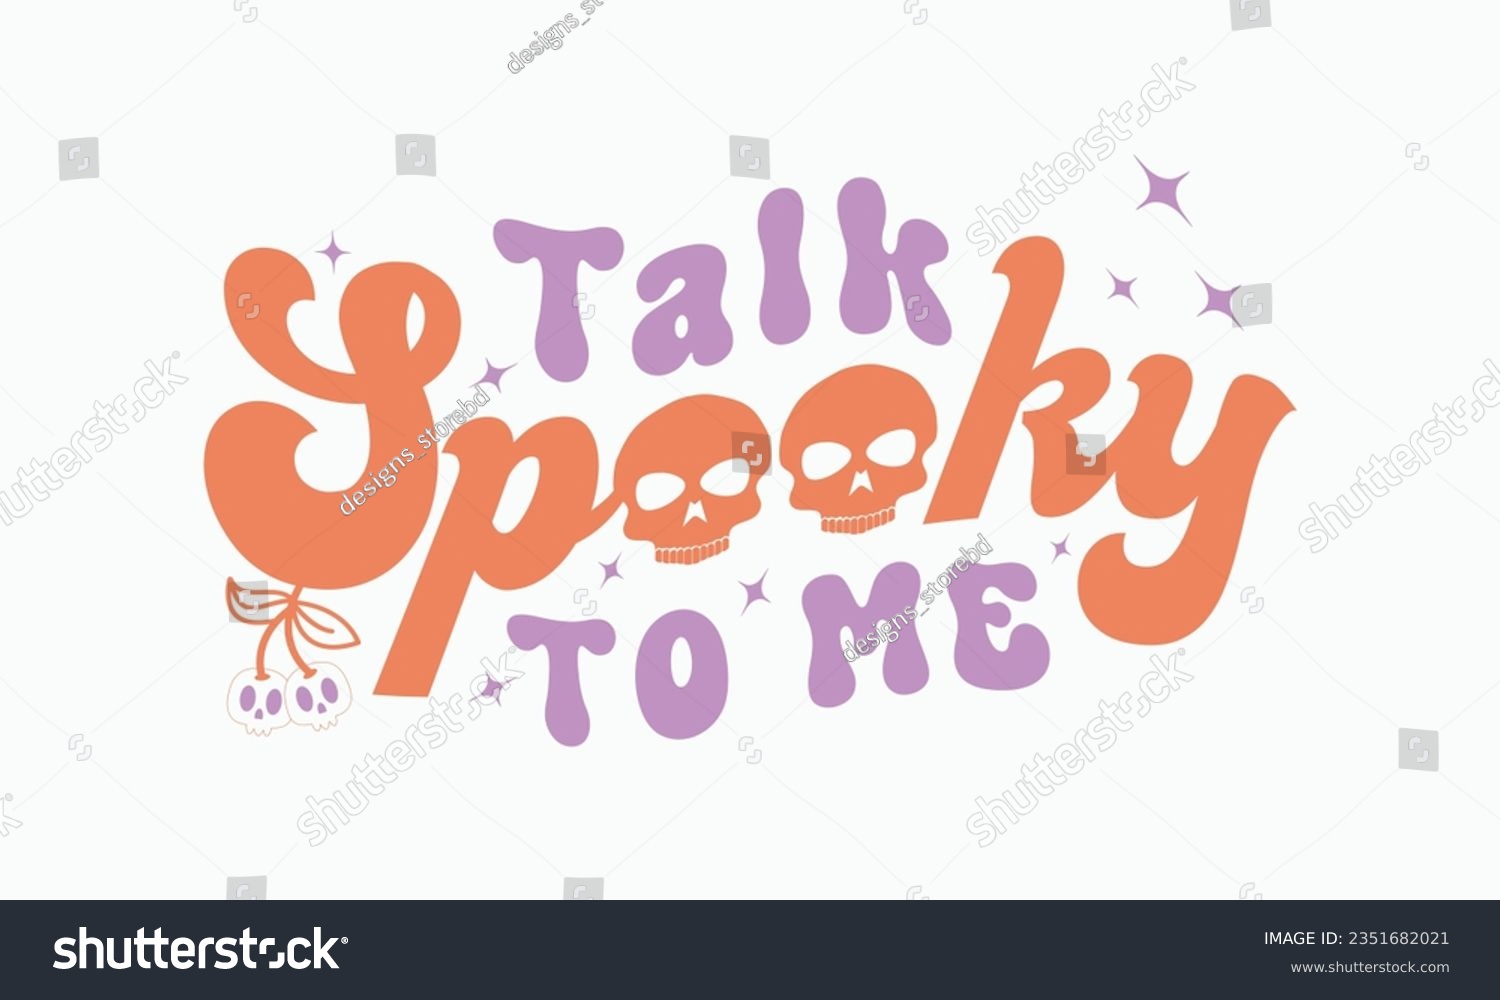 SVG of Talk spooky to me svg, halloween svg design bundle, Retro halloween svg, happy halloween vector, pumpkin, witch, spooky, ghost, funny halloween t-shirt quotes Bundle, Cut File Cricut, Silhouette  svg